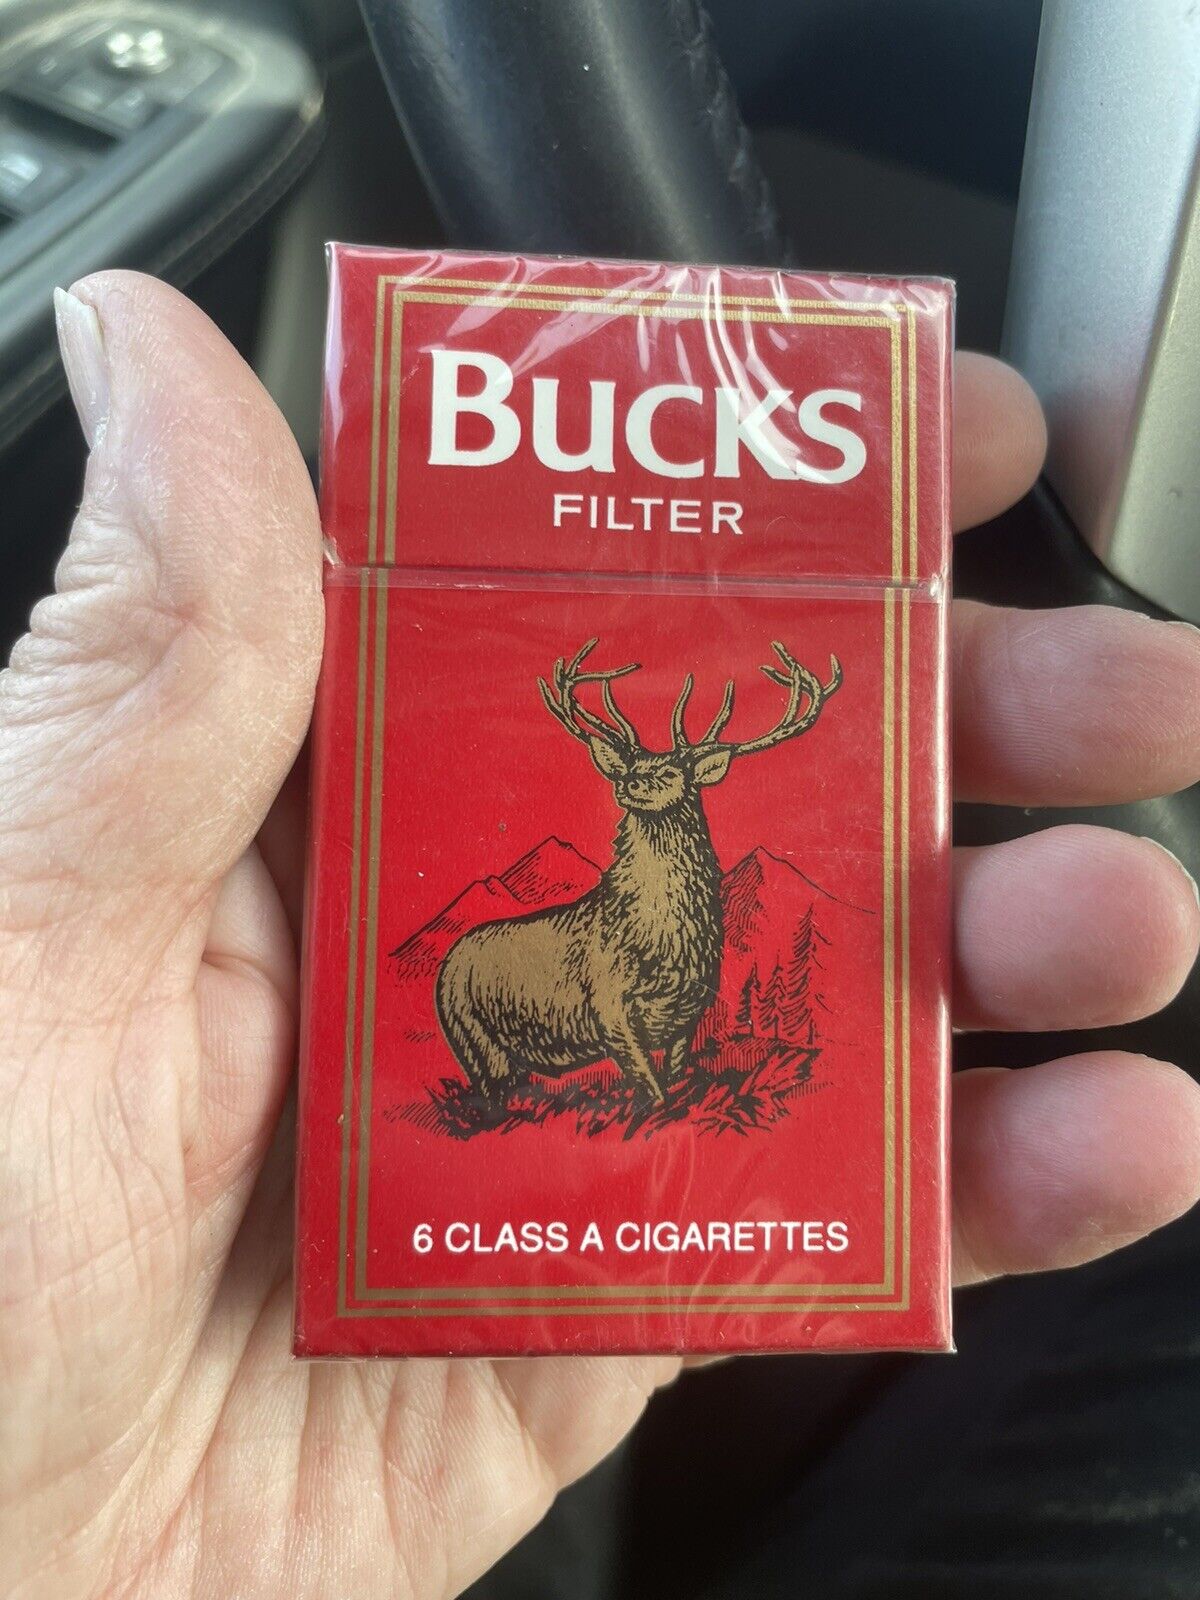 Bucks Filter Cigarette empty Complimentary packet box vintage